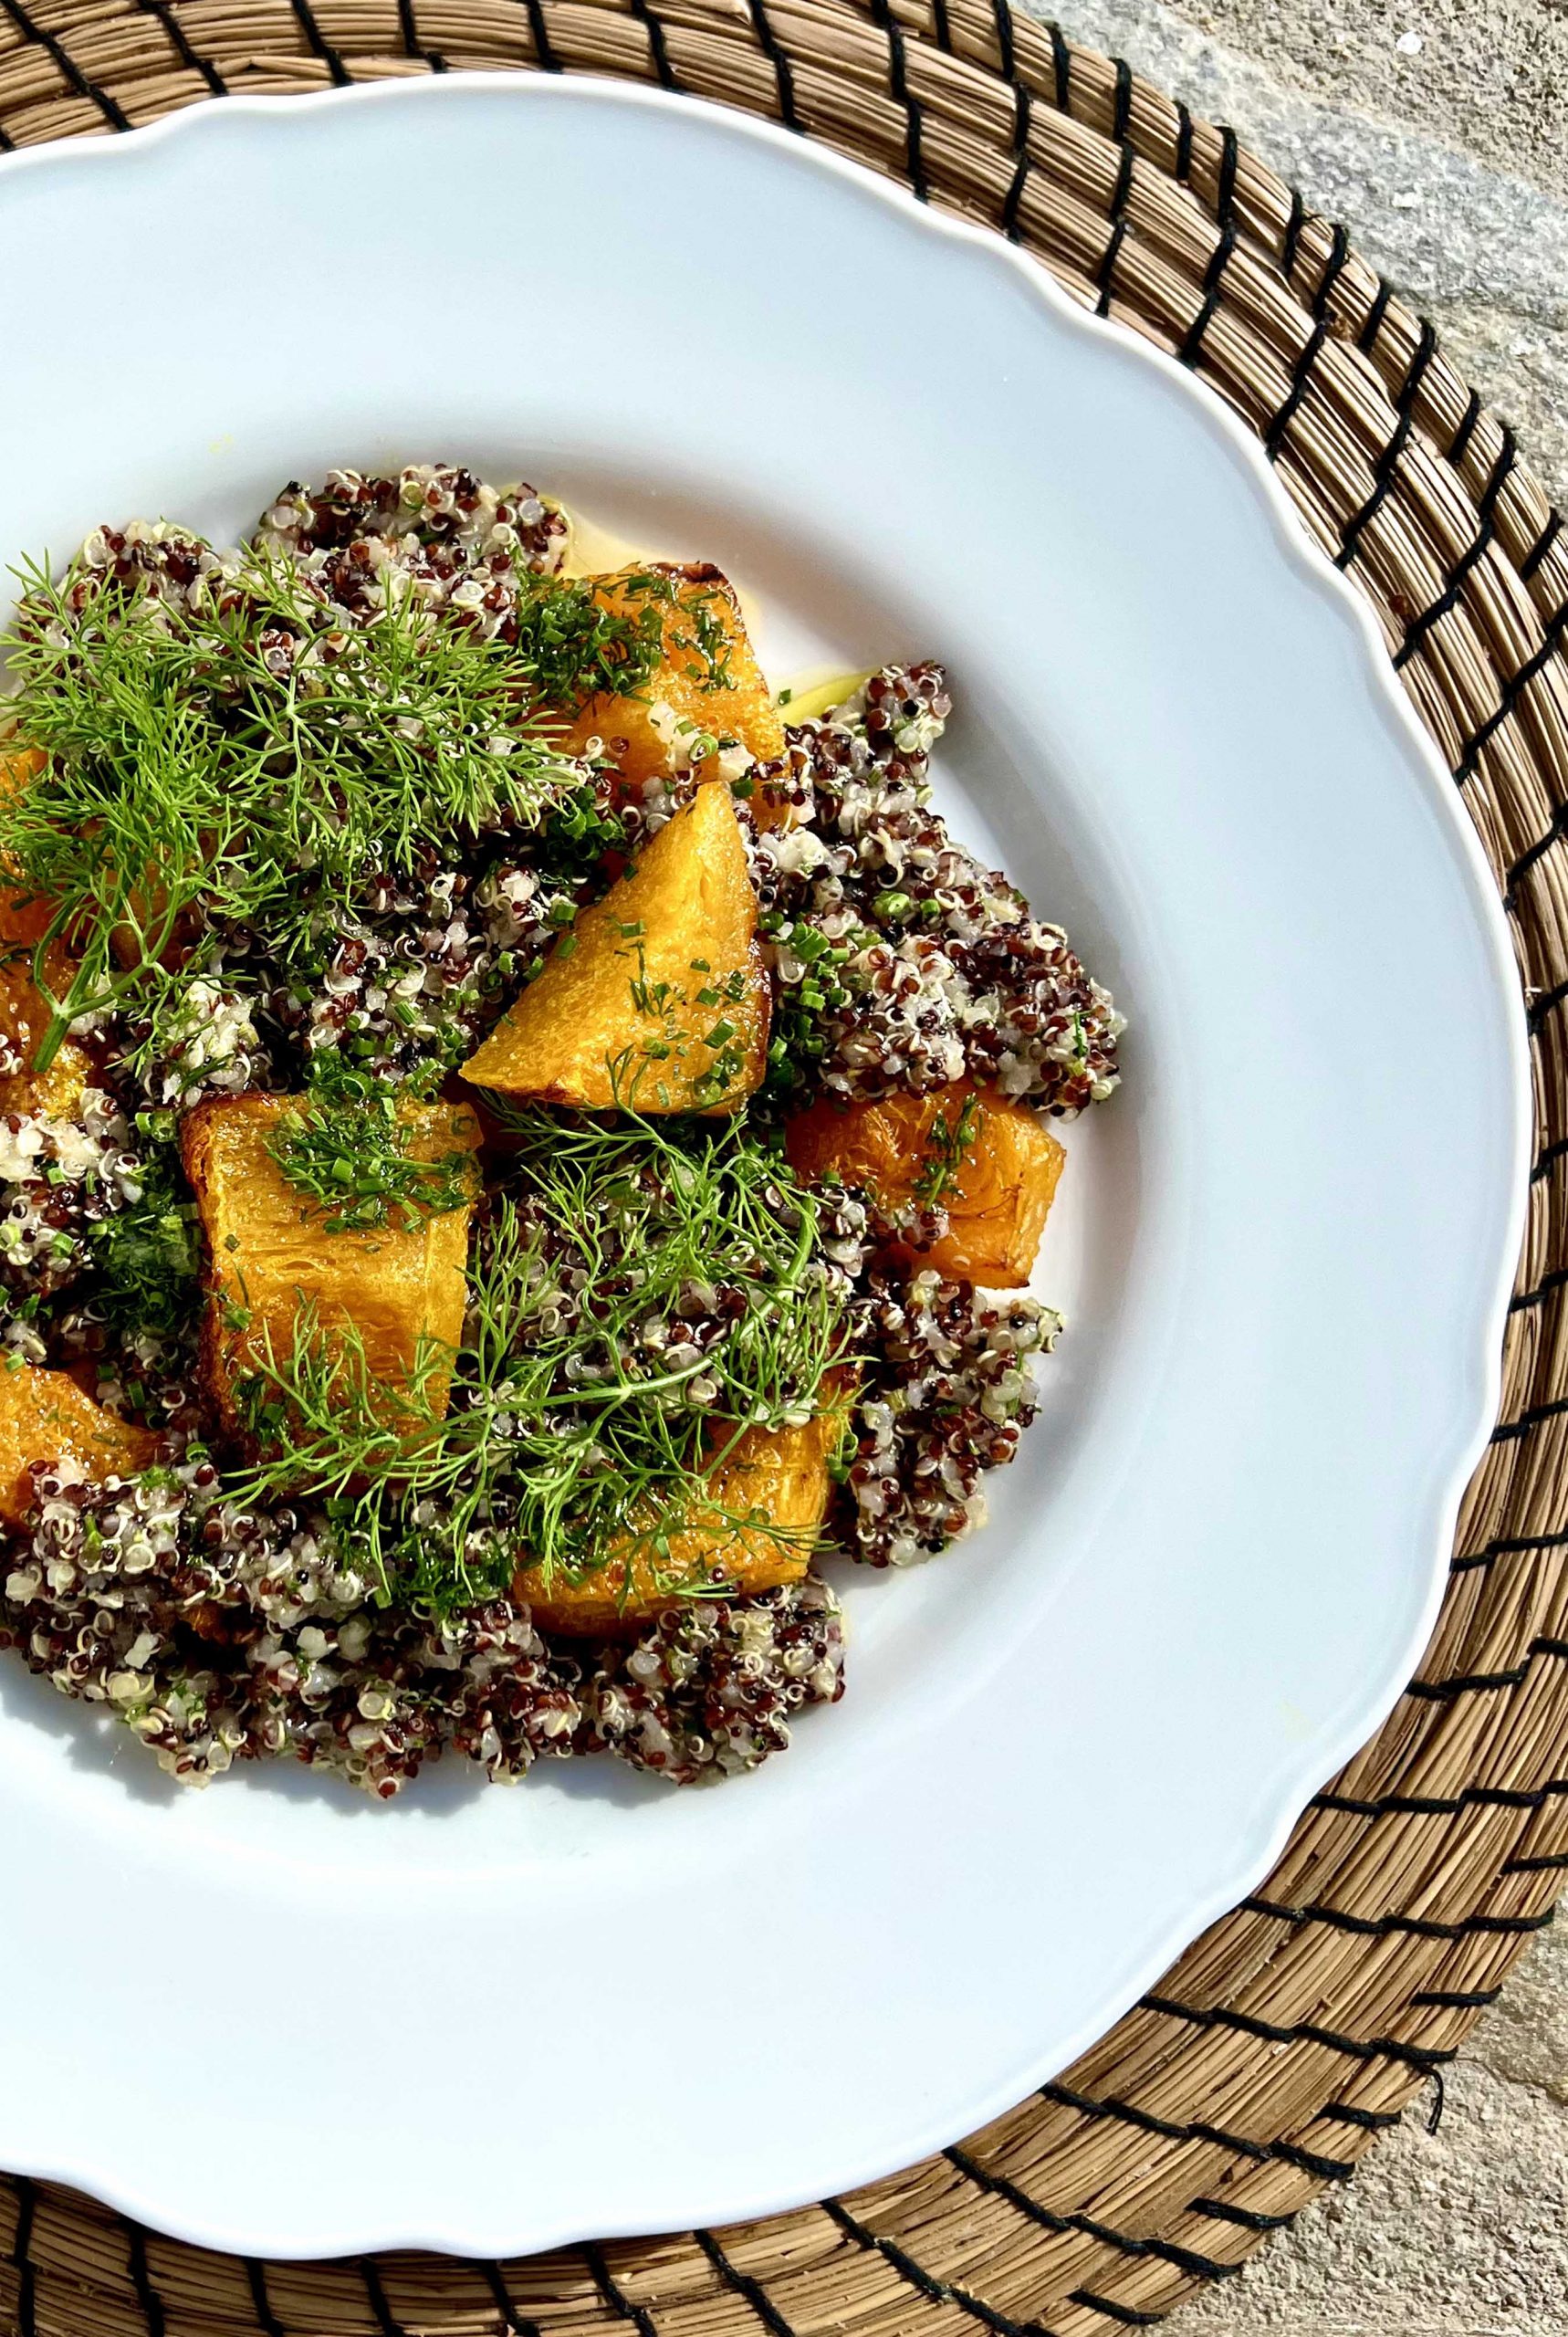 Roasted pumpkin with quinoa and fresh herbs